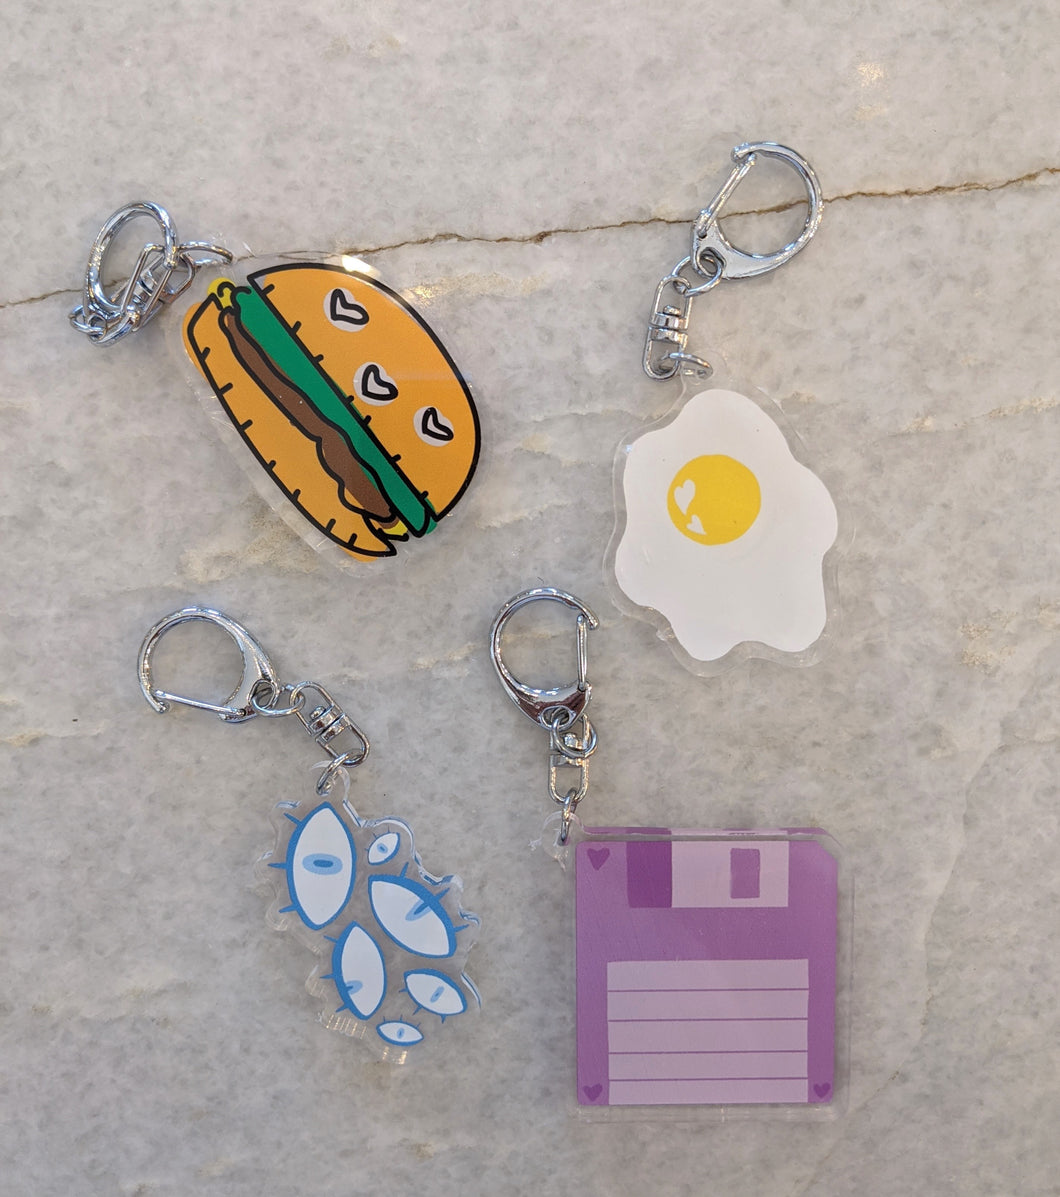 Keychains by local artist Emily Ritchie